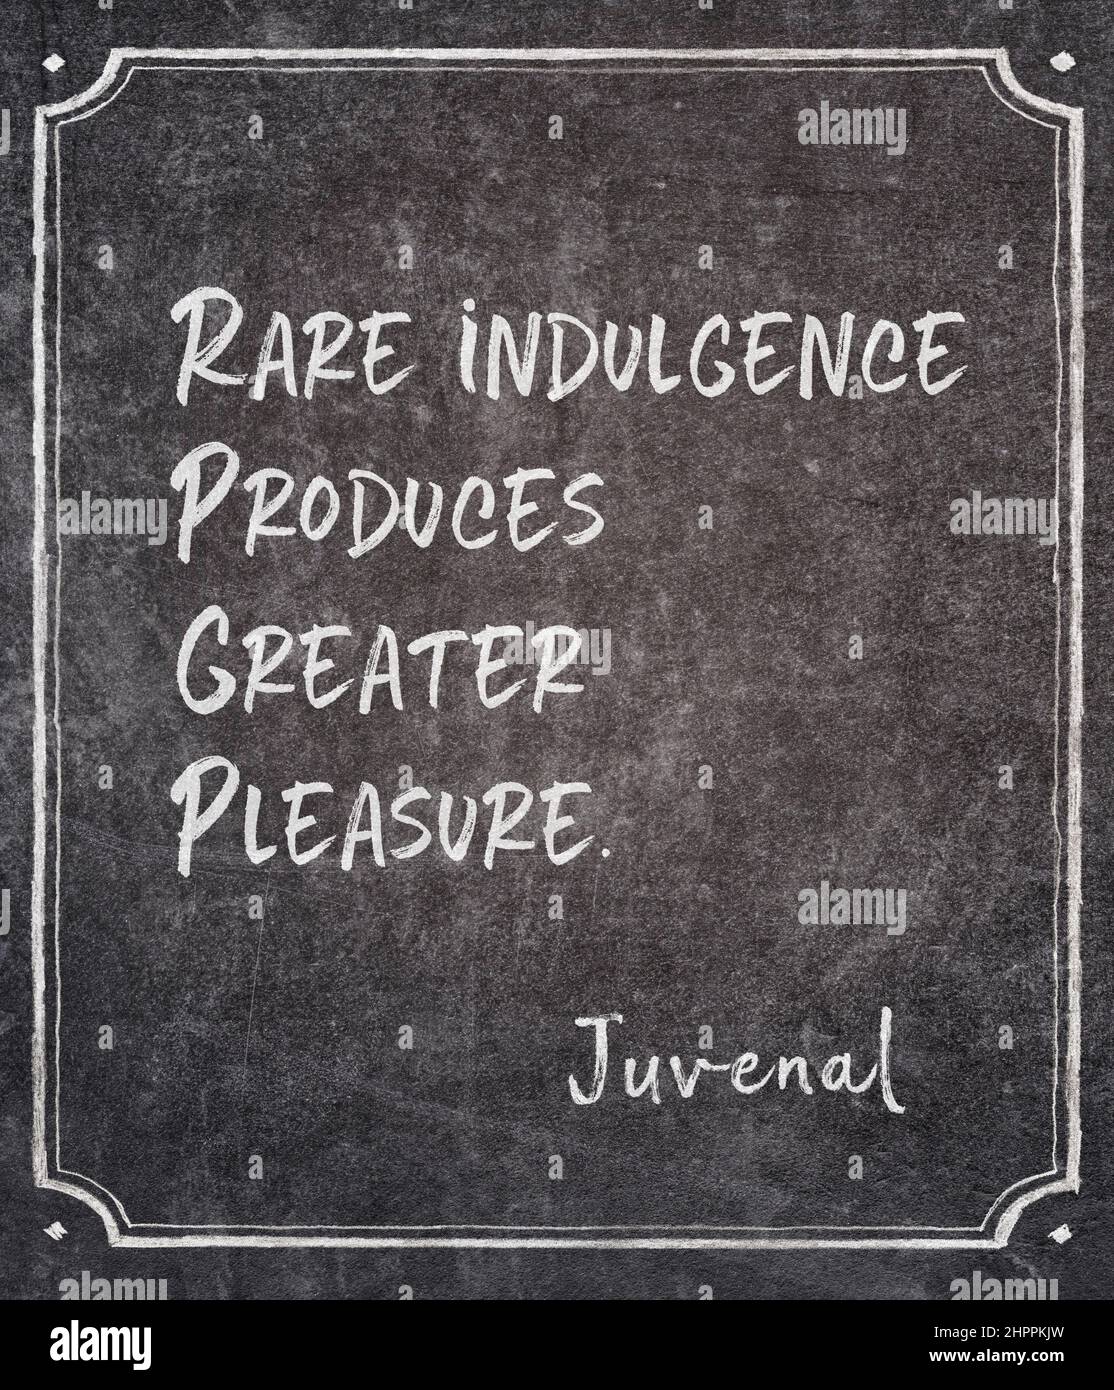 Rare indulgence produces greater pleasure - ancient Roman poet Juvenal quote written on framed chalkboard Stock Photo